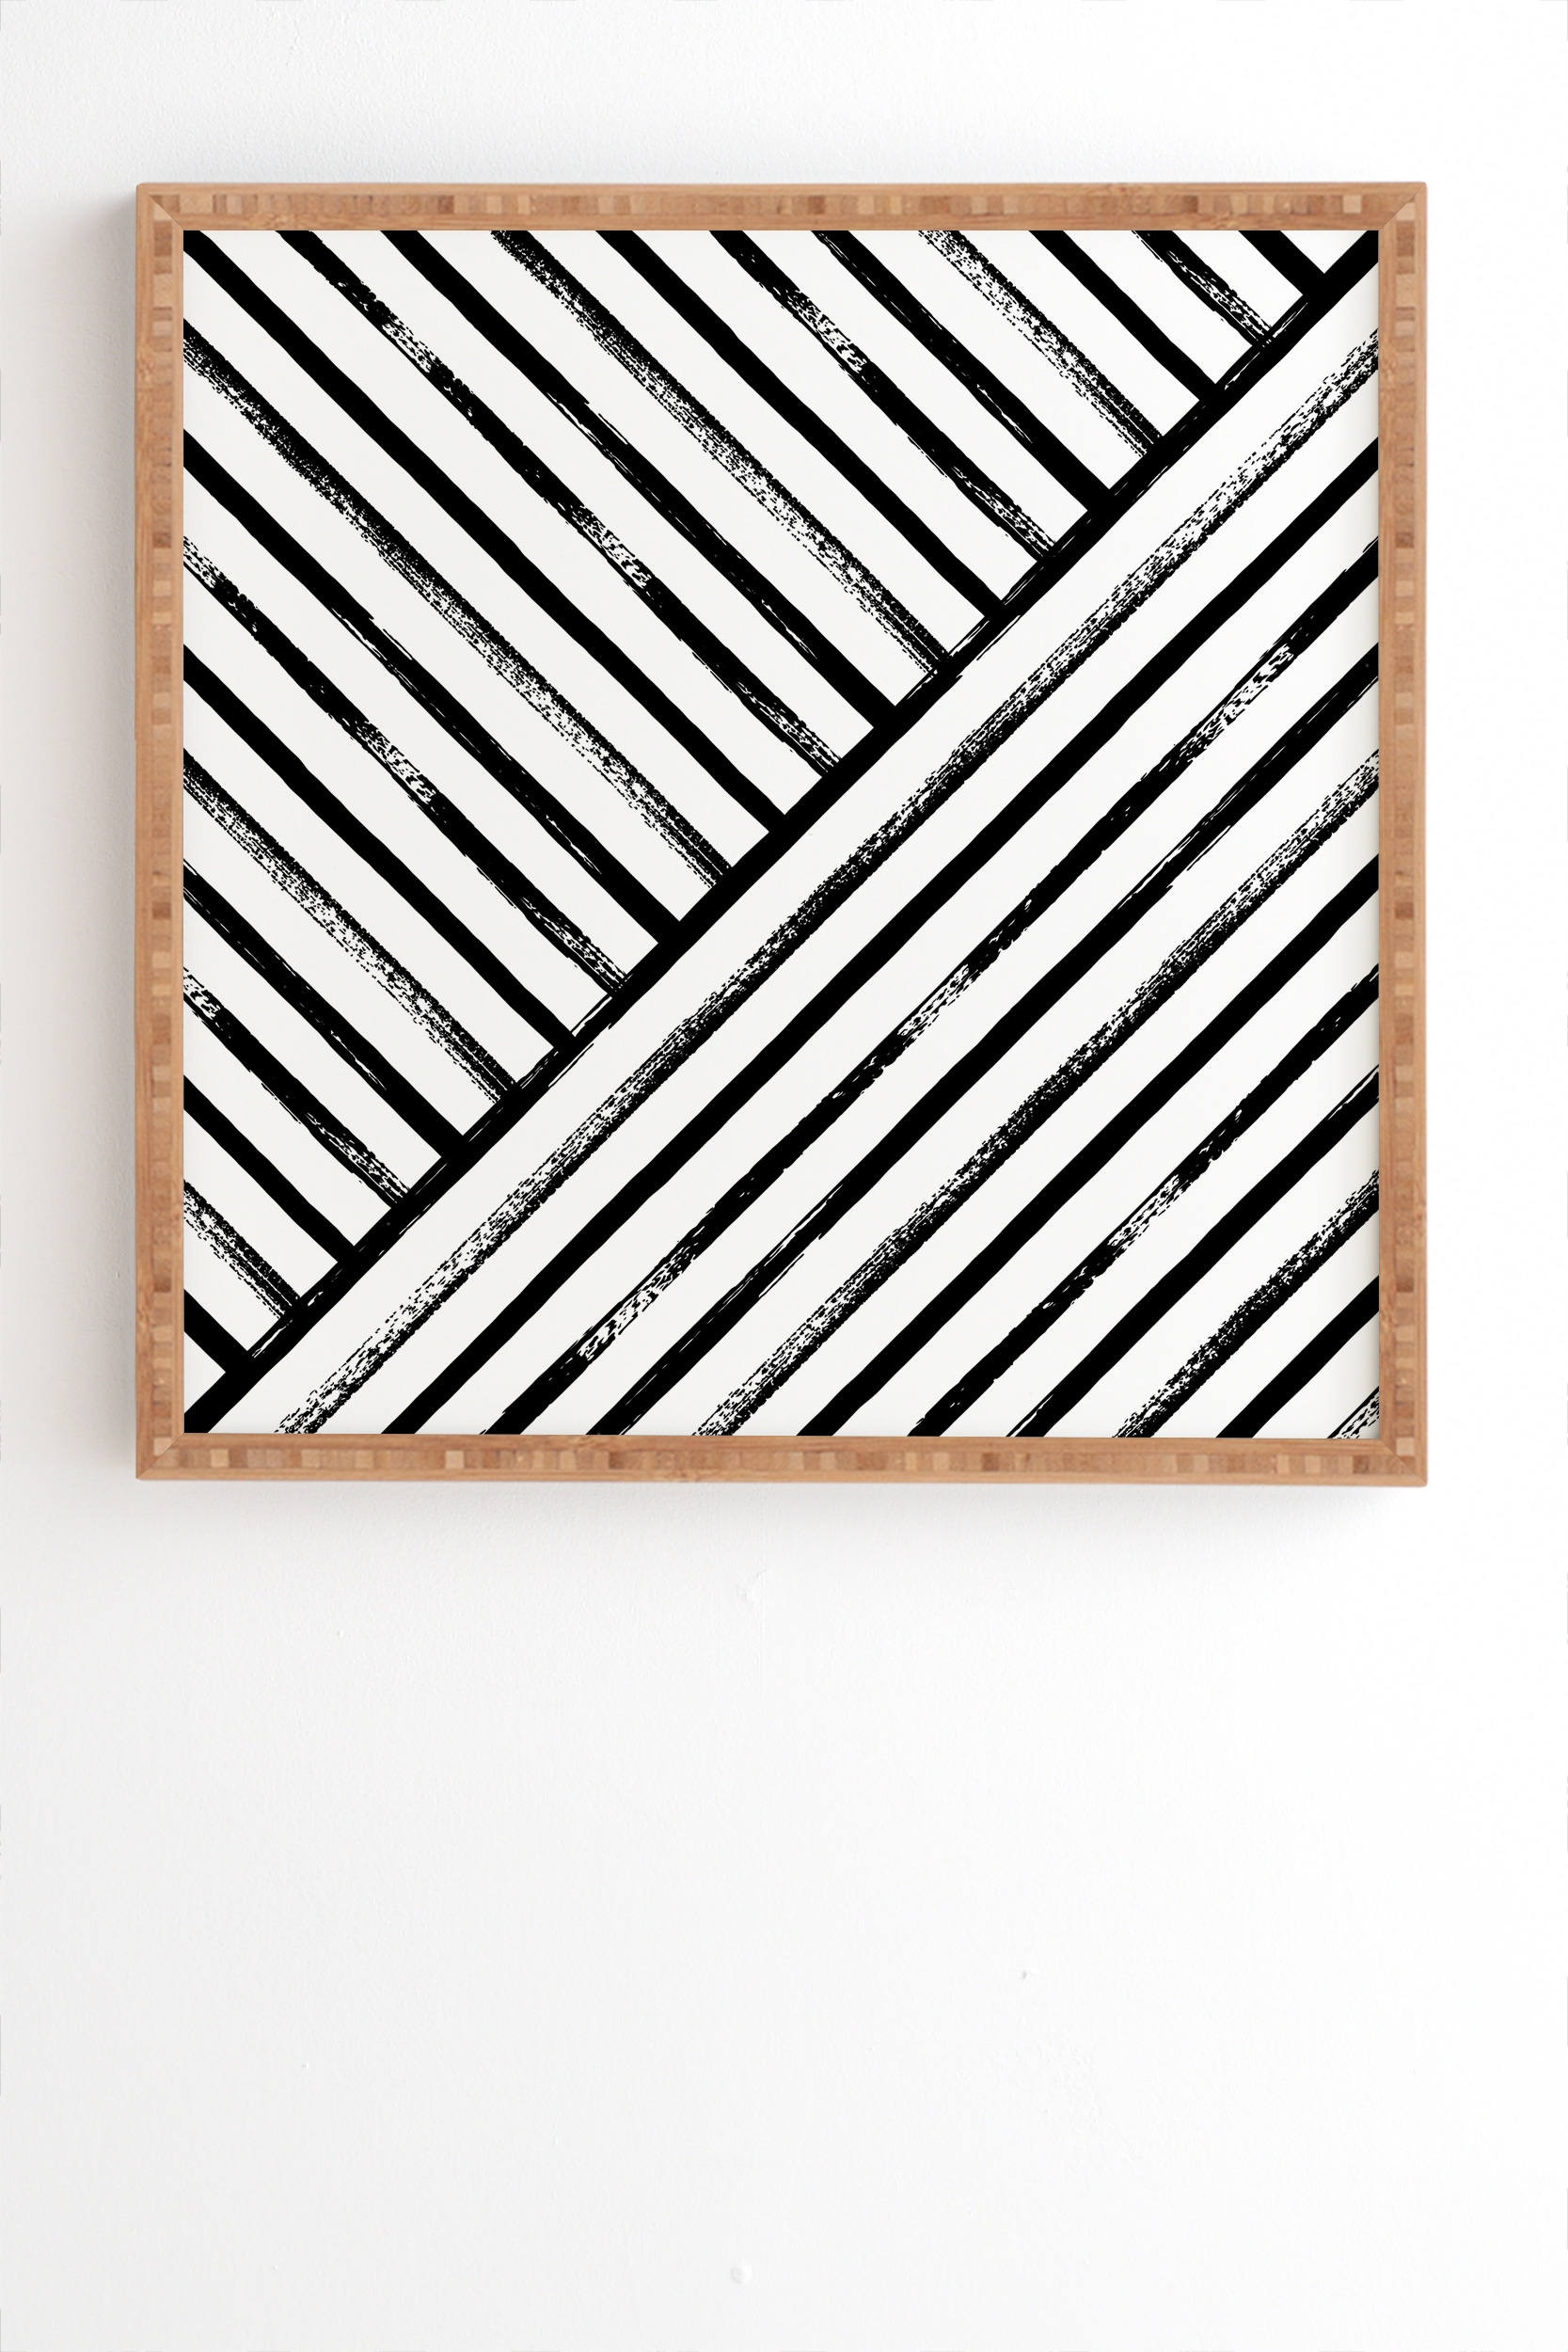 Geometric Stripe Pattern by Kelly Haines - Framed Wall Art Bamboo 30" x 30" - Image 1